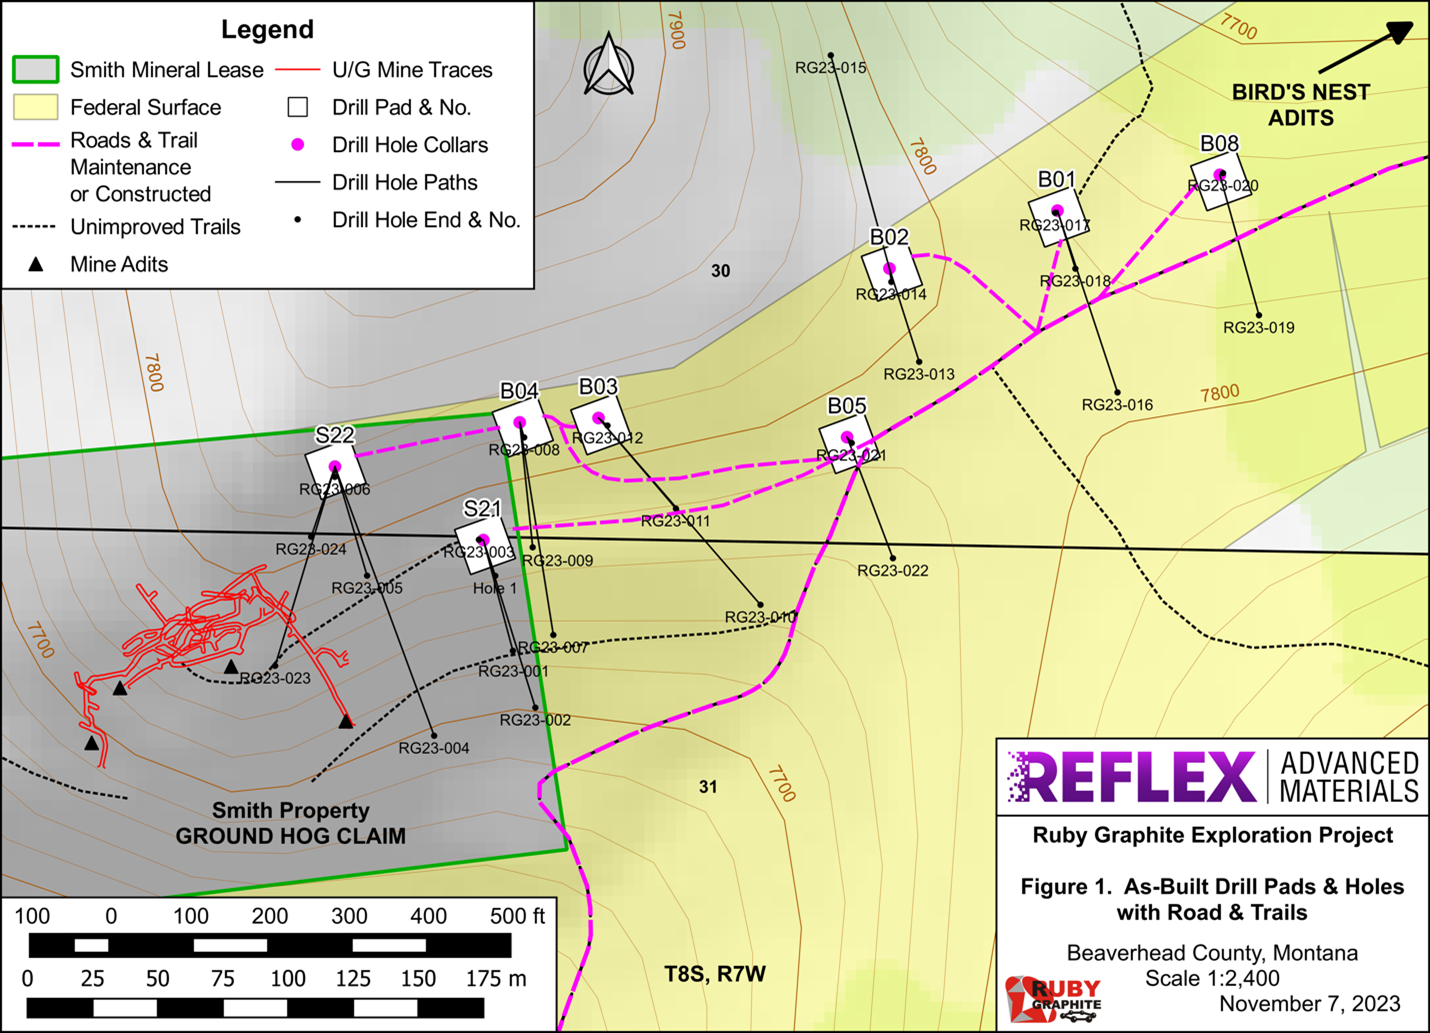 Figure 1: Map of Ruby Graphite Project with Drill Hole placements